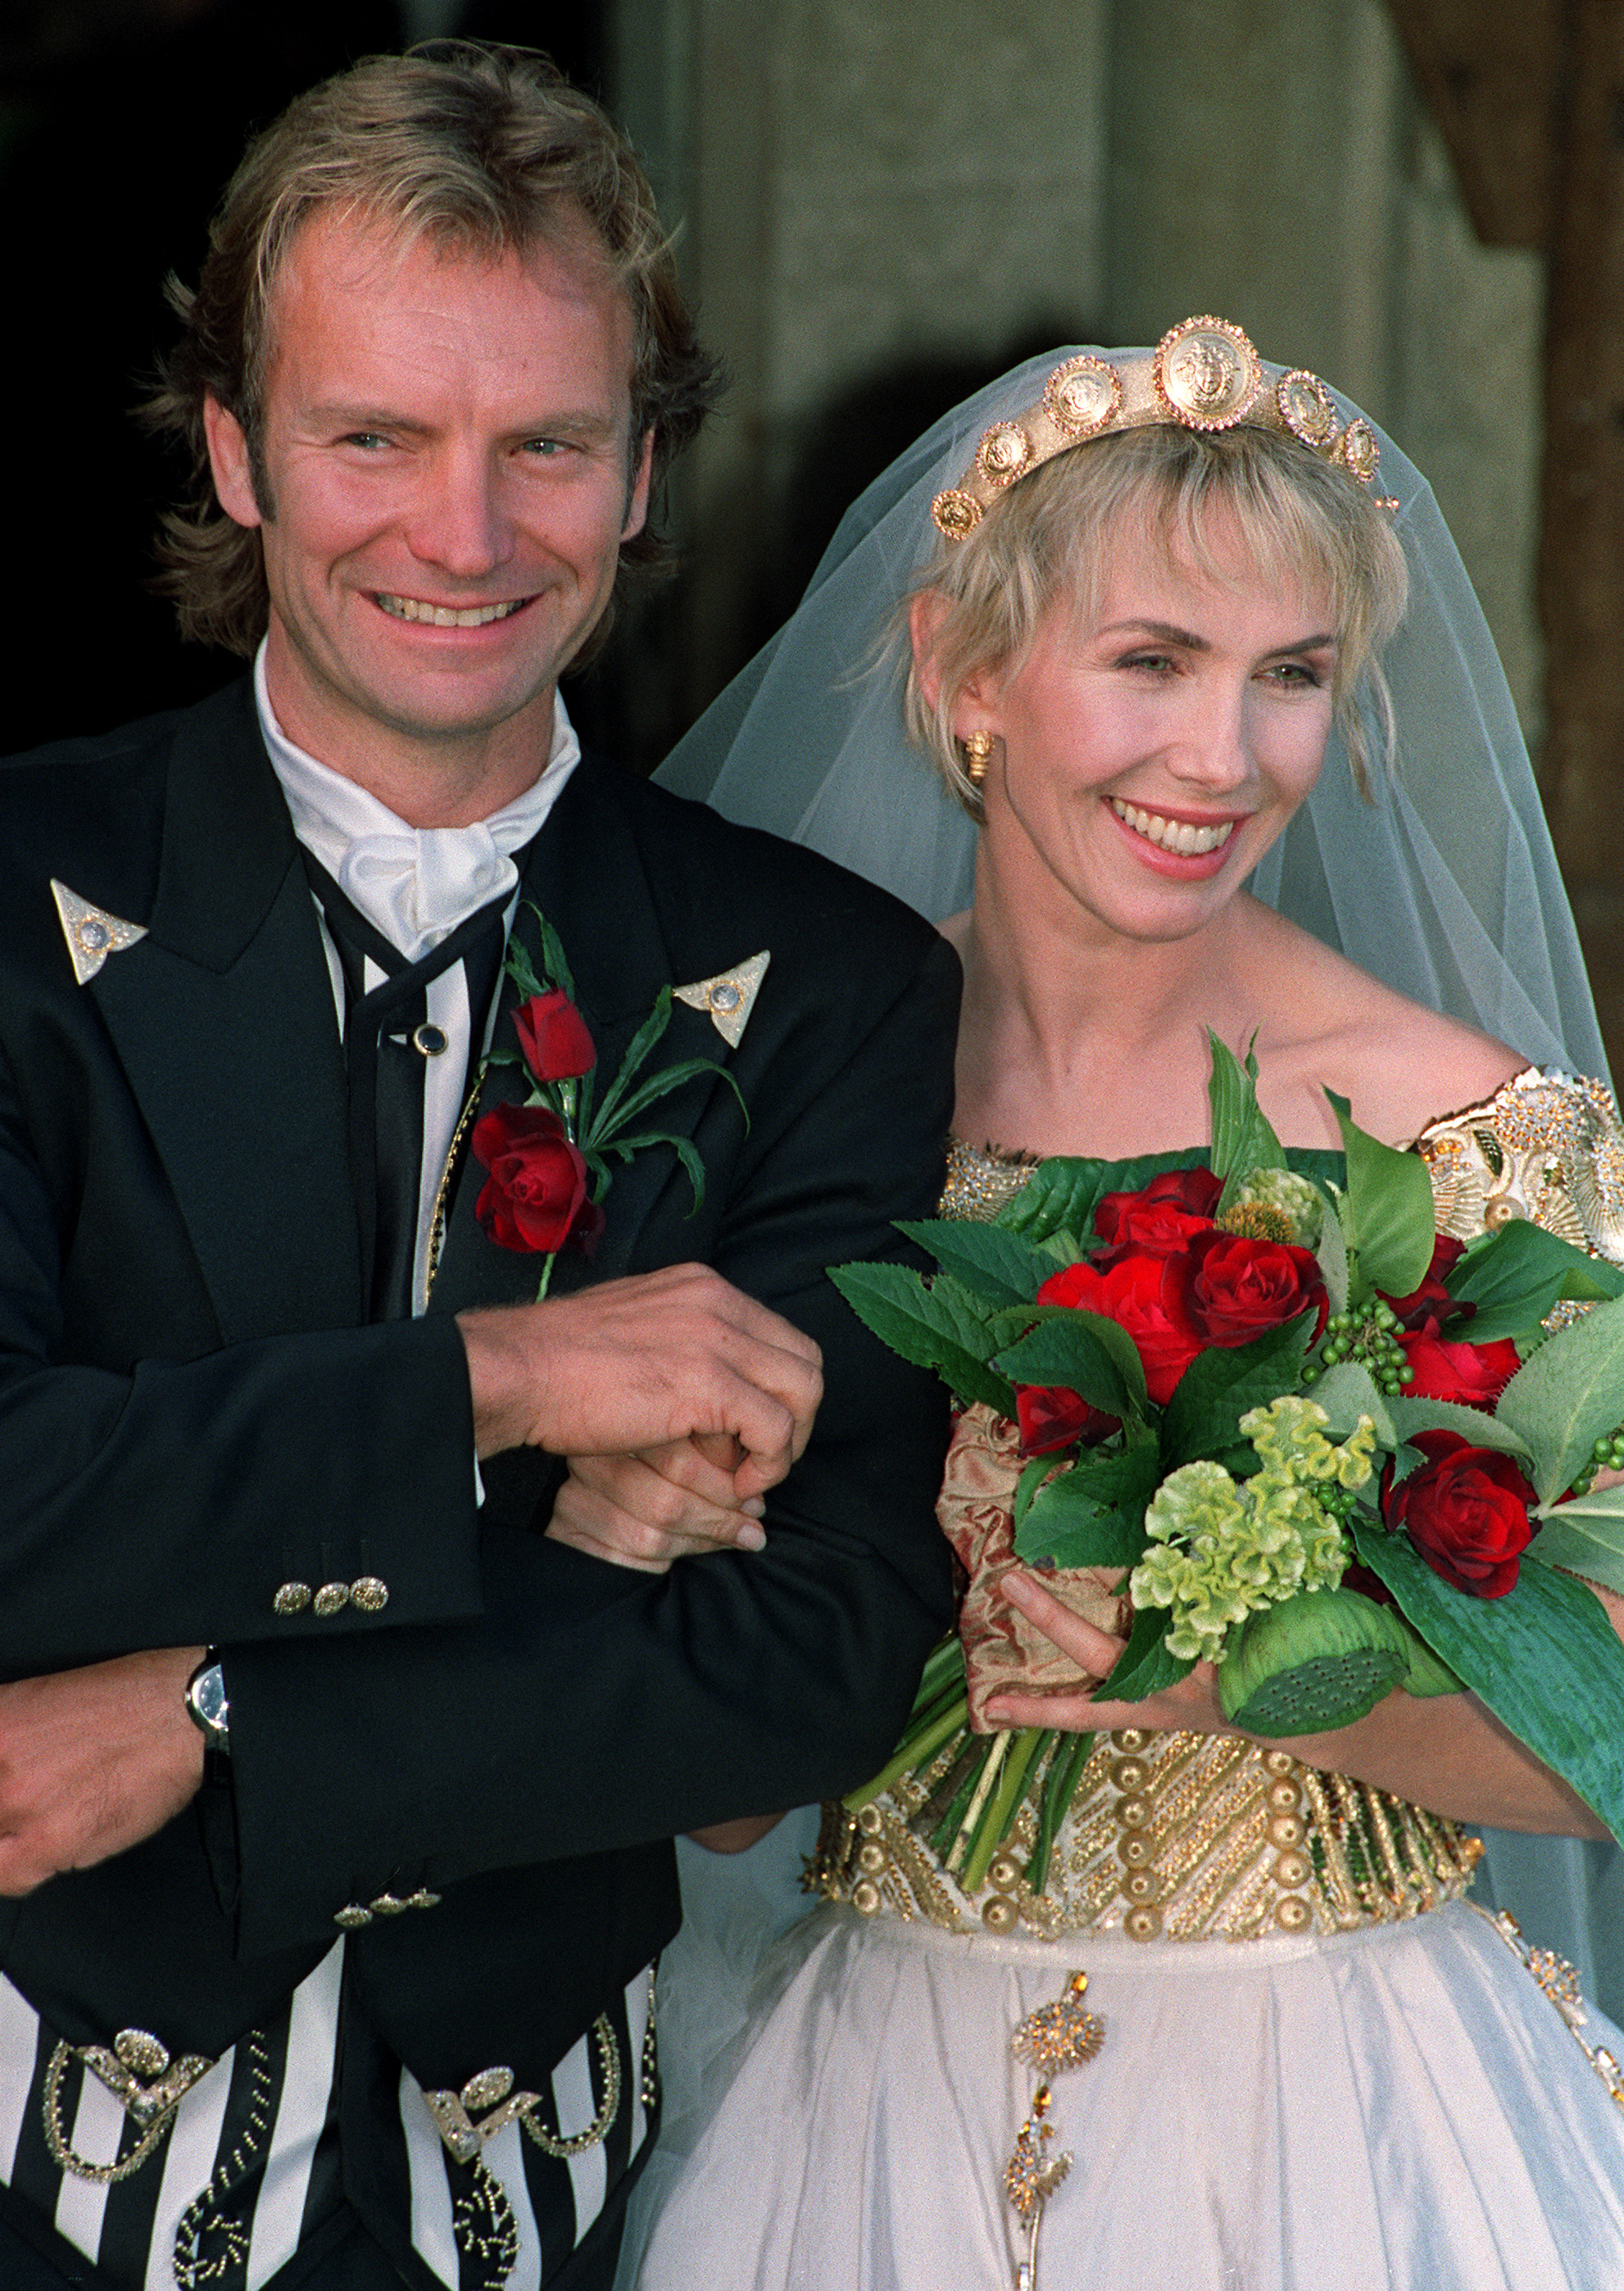 Sting and Trudie Styler prior to entering the church in Amesbury on August 22, 1992. | Source: Getty Images